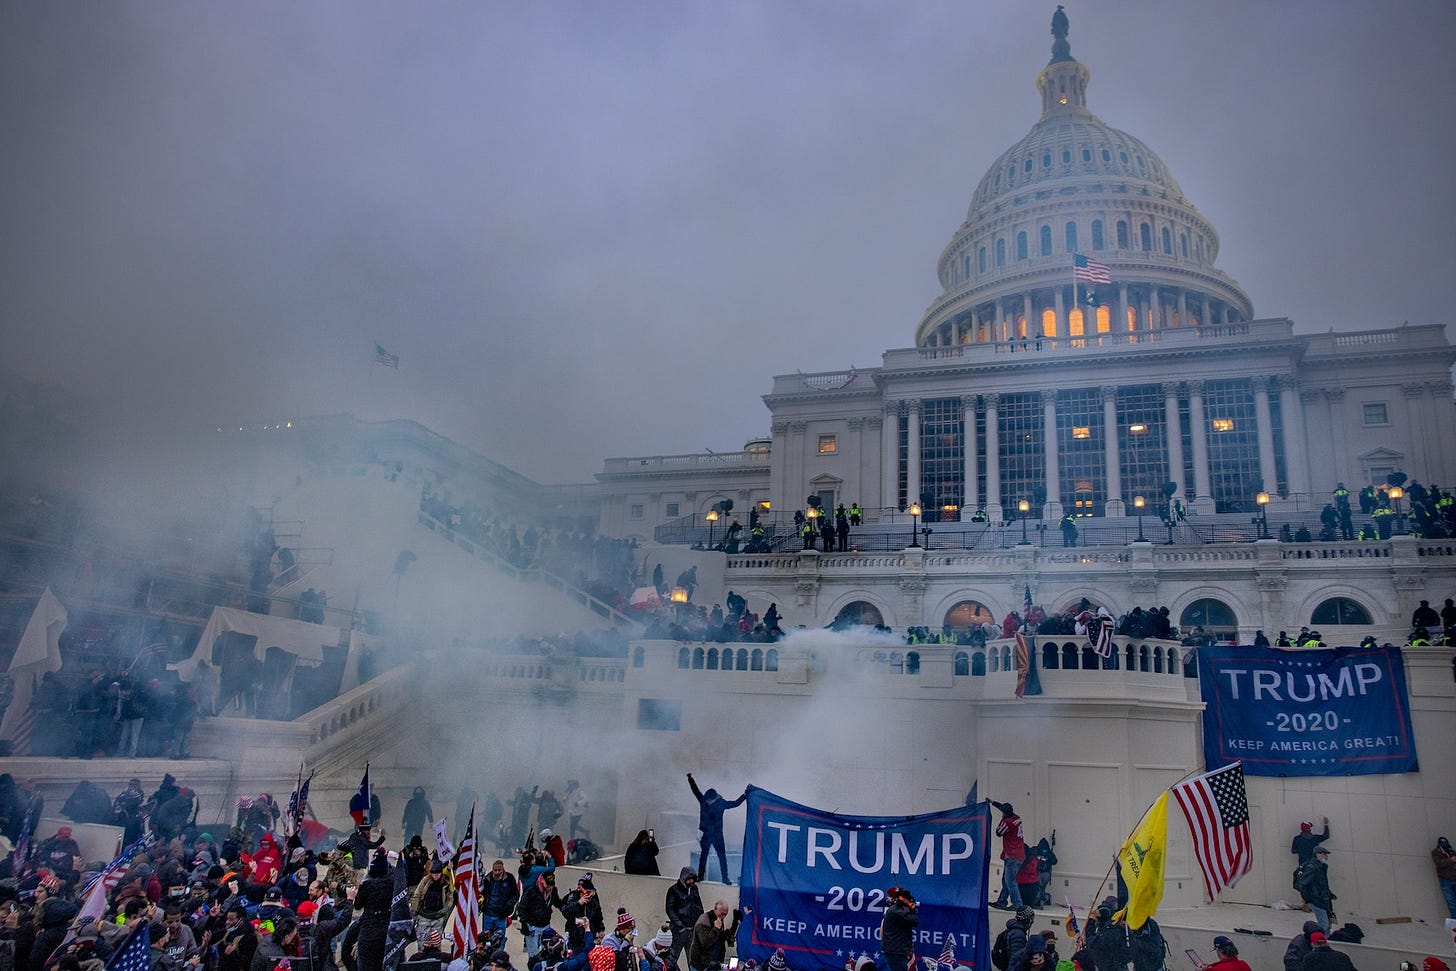 Photos from Jan. 6 show the U.S. Capitol under attack - The Washington Post